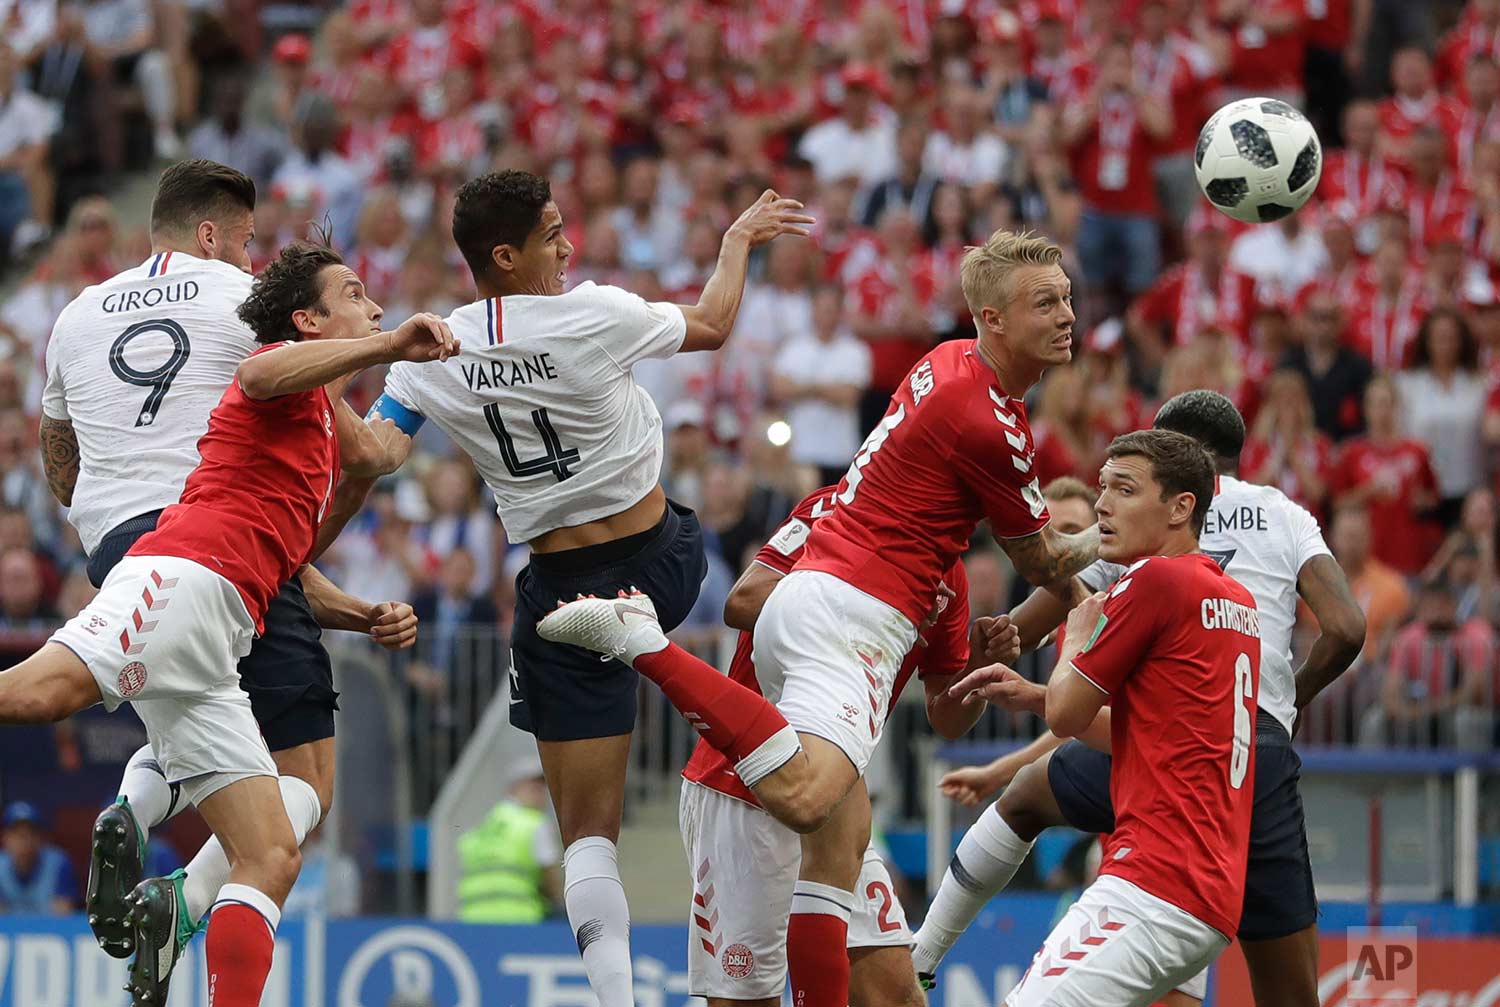  Denmark's Simon Kjaer, top centre right, heads the ball under pressure from France's Raphael Varane top center left, during the group C match between Denmark and France at the 2018 soccer World Cup at the Luzhniki Stadium in Moscow, Russia, Tuesday,